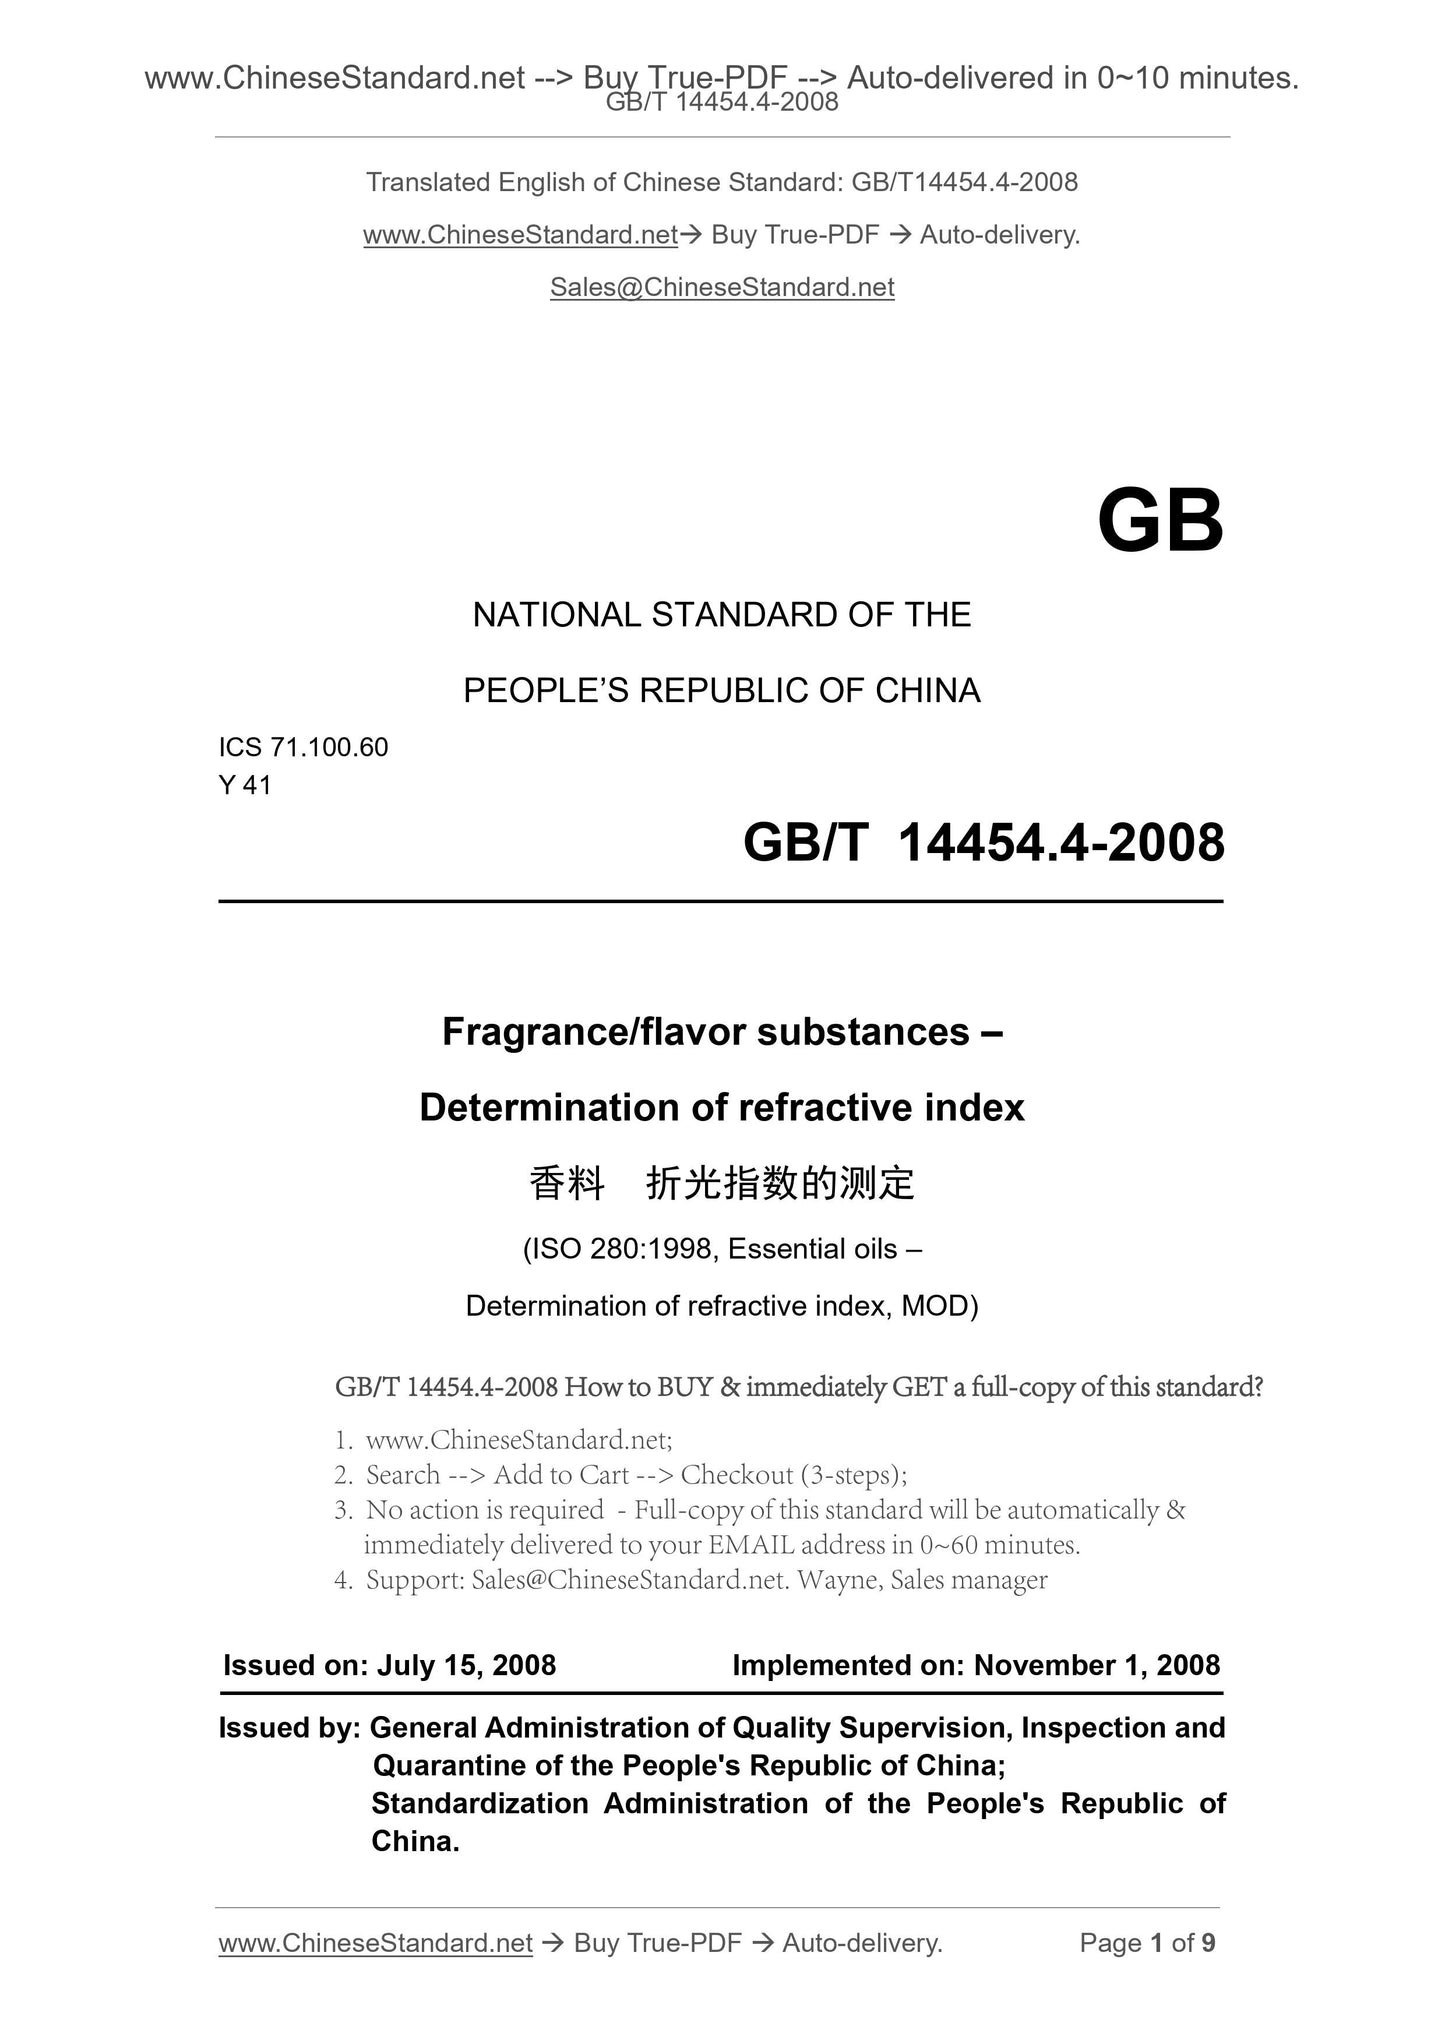 GB/T 14454.4-2008 Page 1